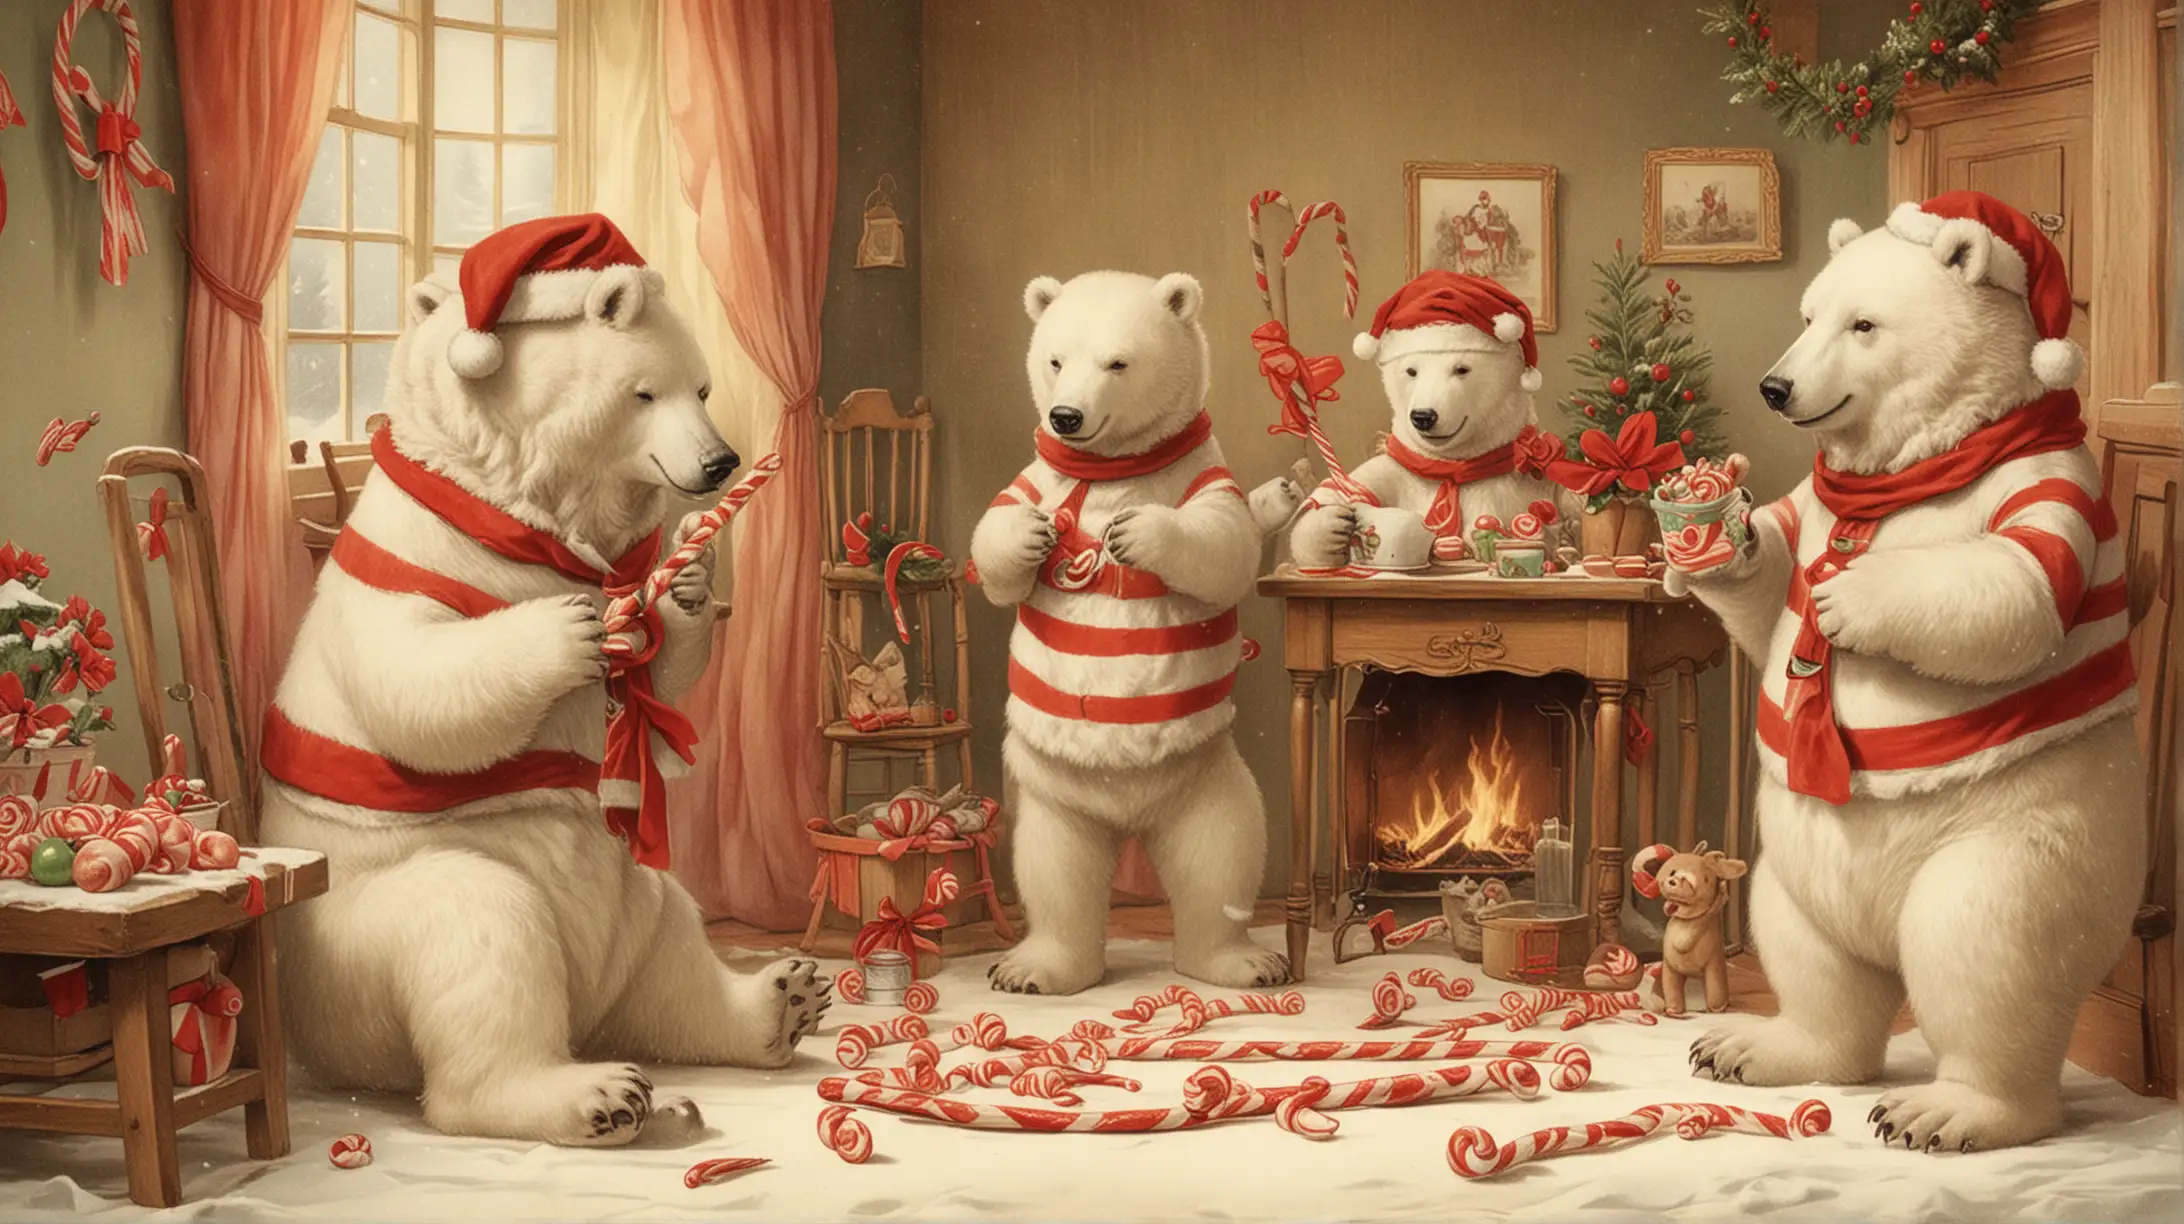 Snow Bears Decorating Candy Canes in Santas Vintage Home